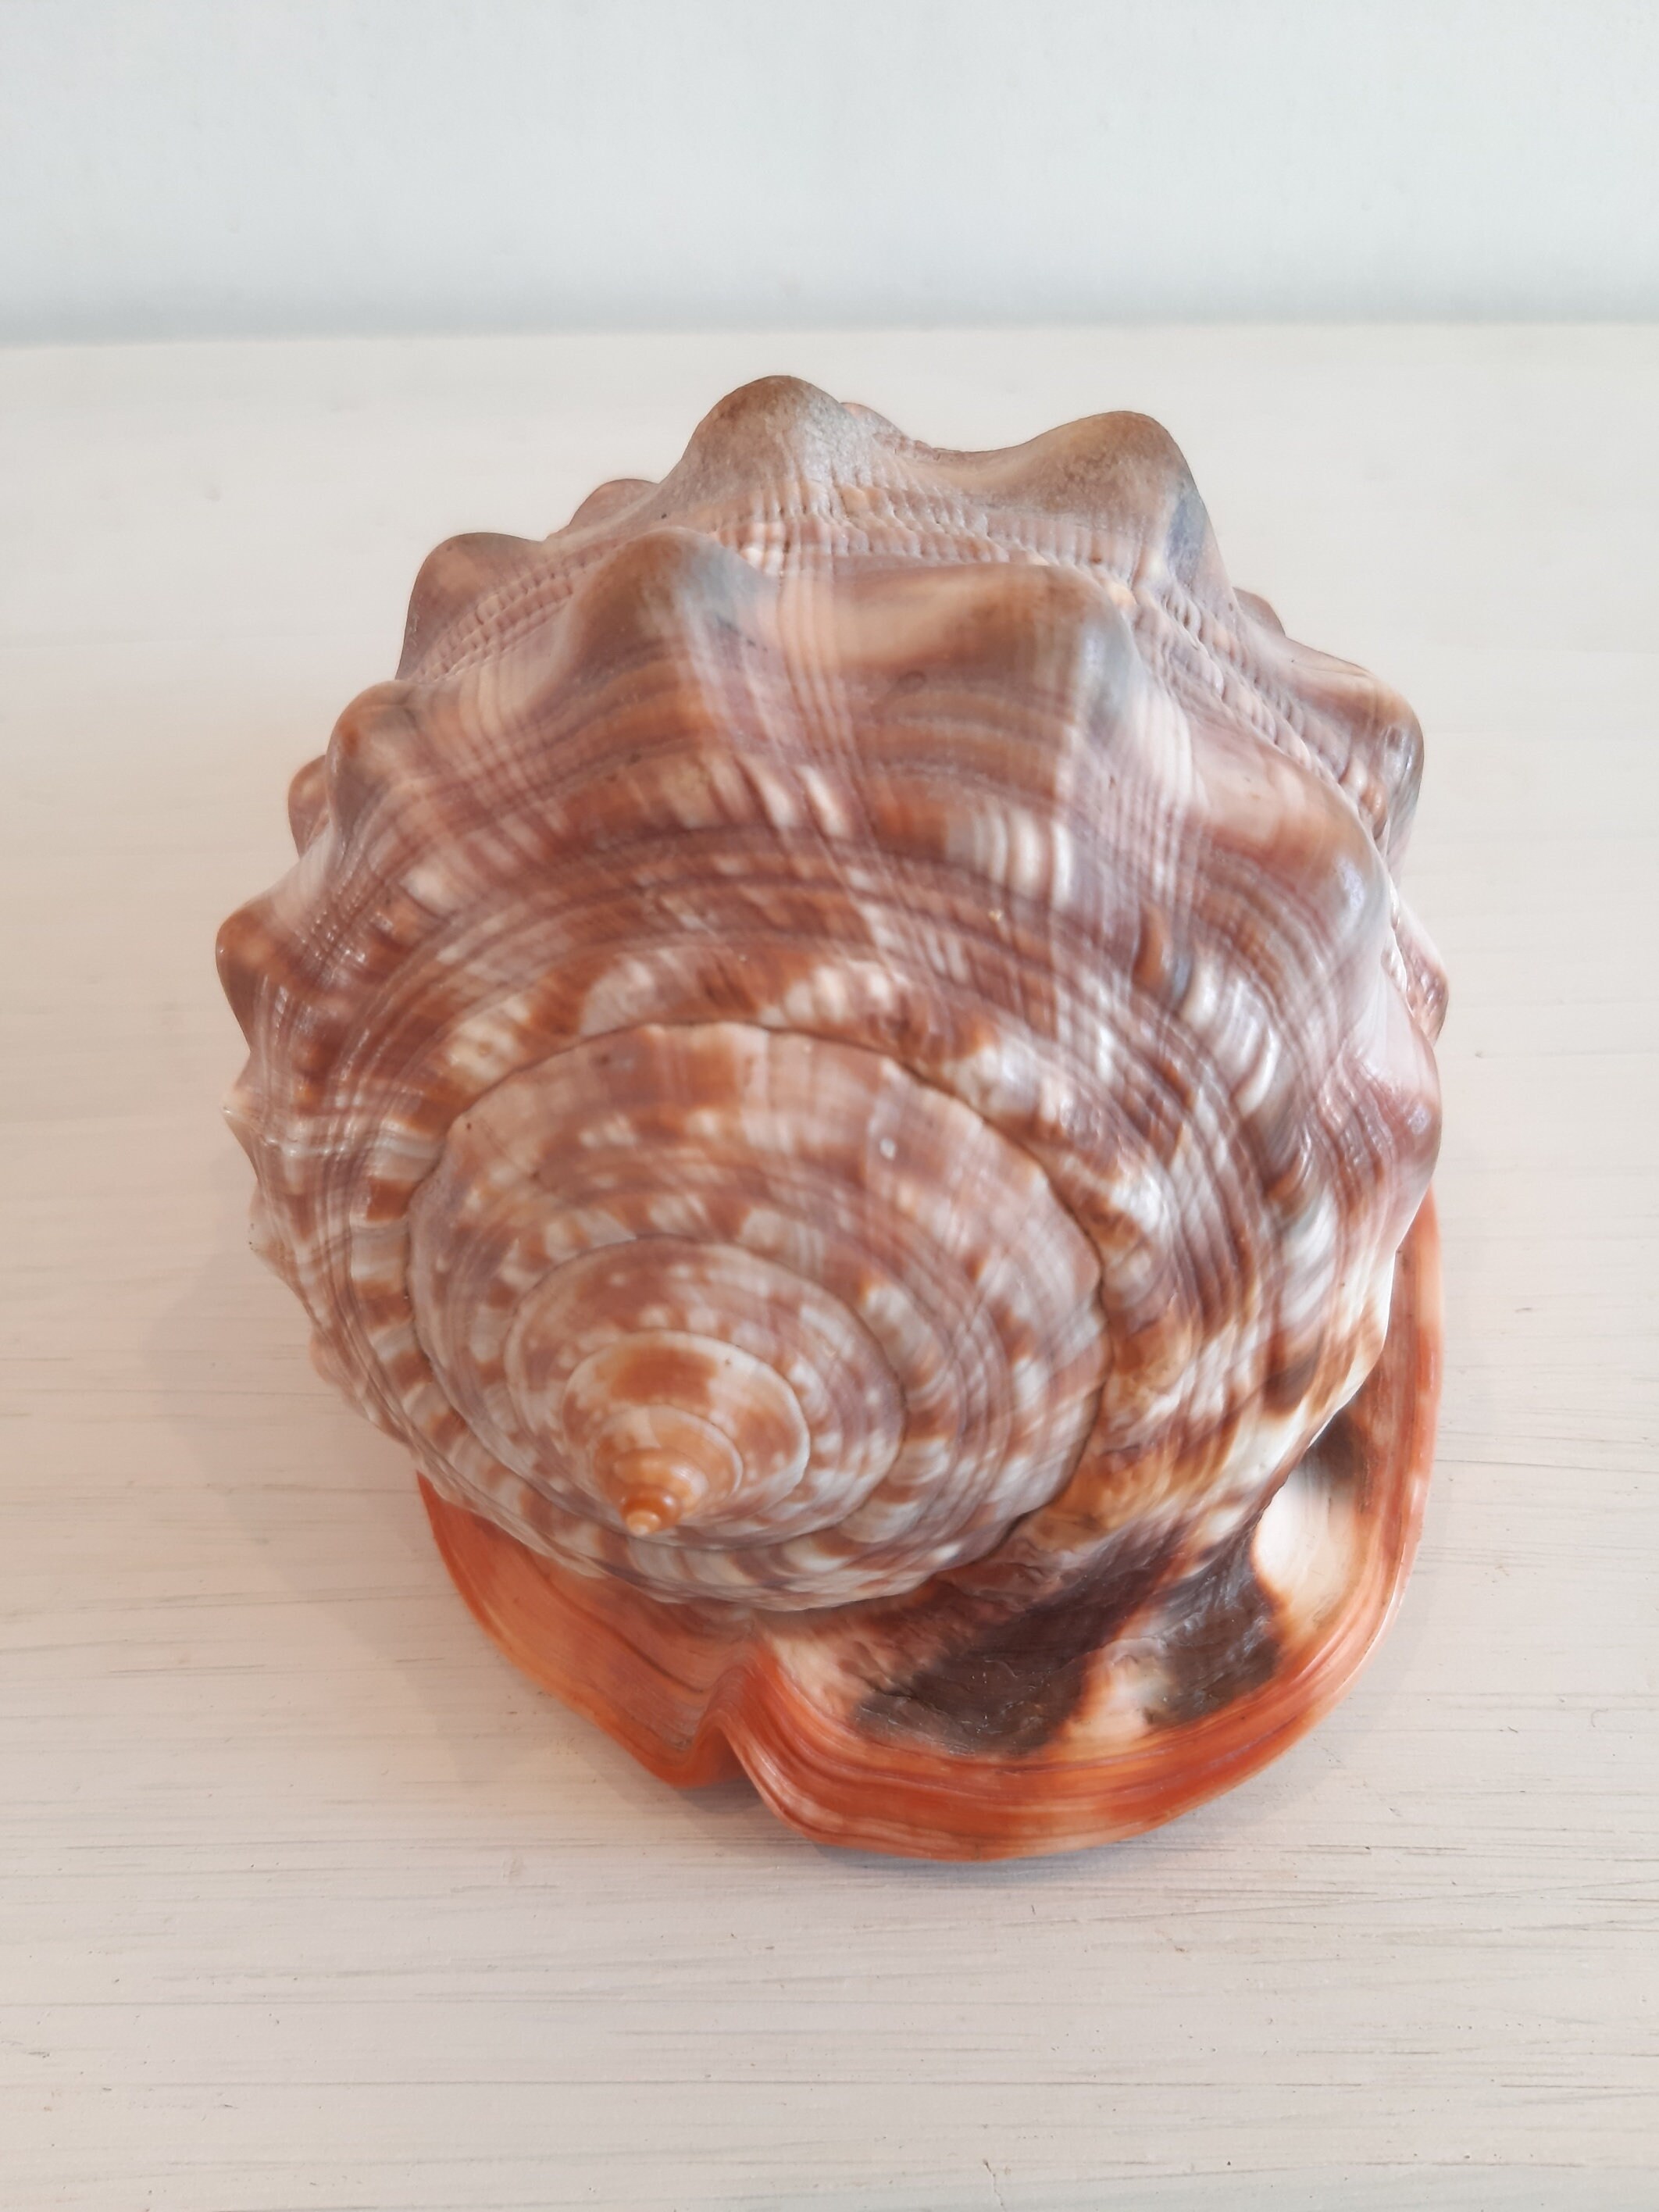 Vintage Natural Conch Shell Coral Sea Snail Beach Fish Tank Ornement Décorations Maison Collectible 